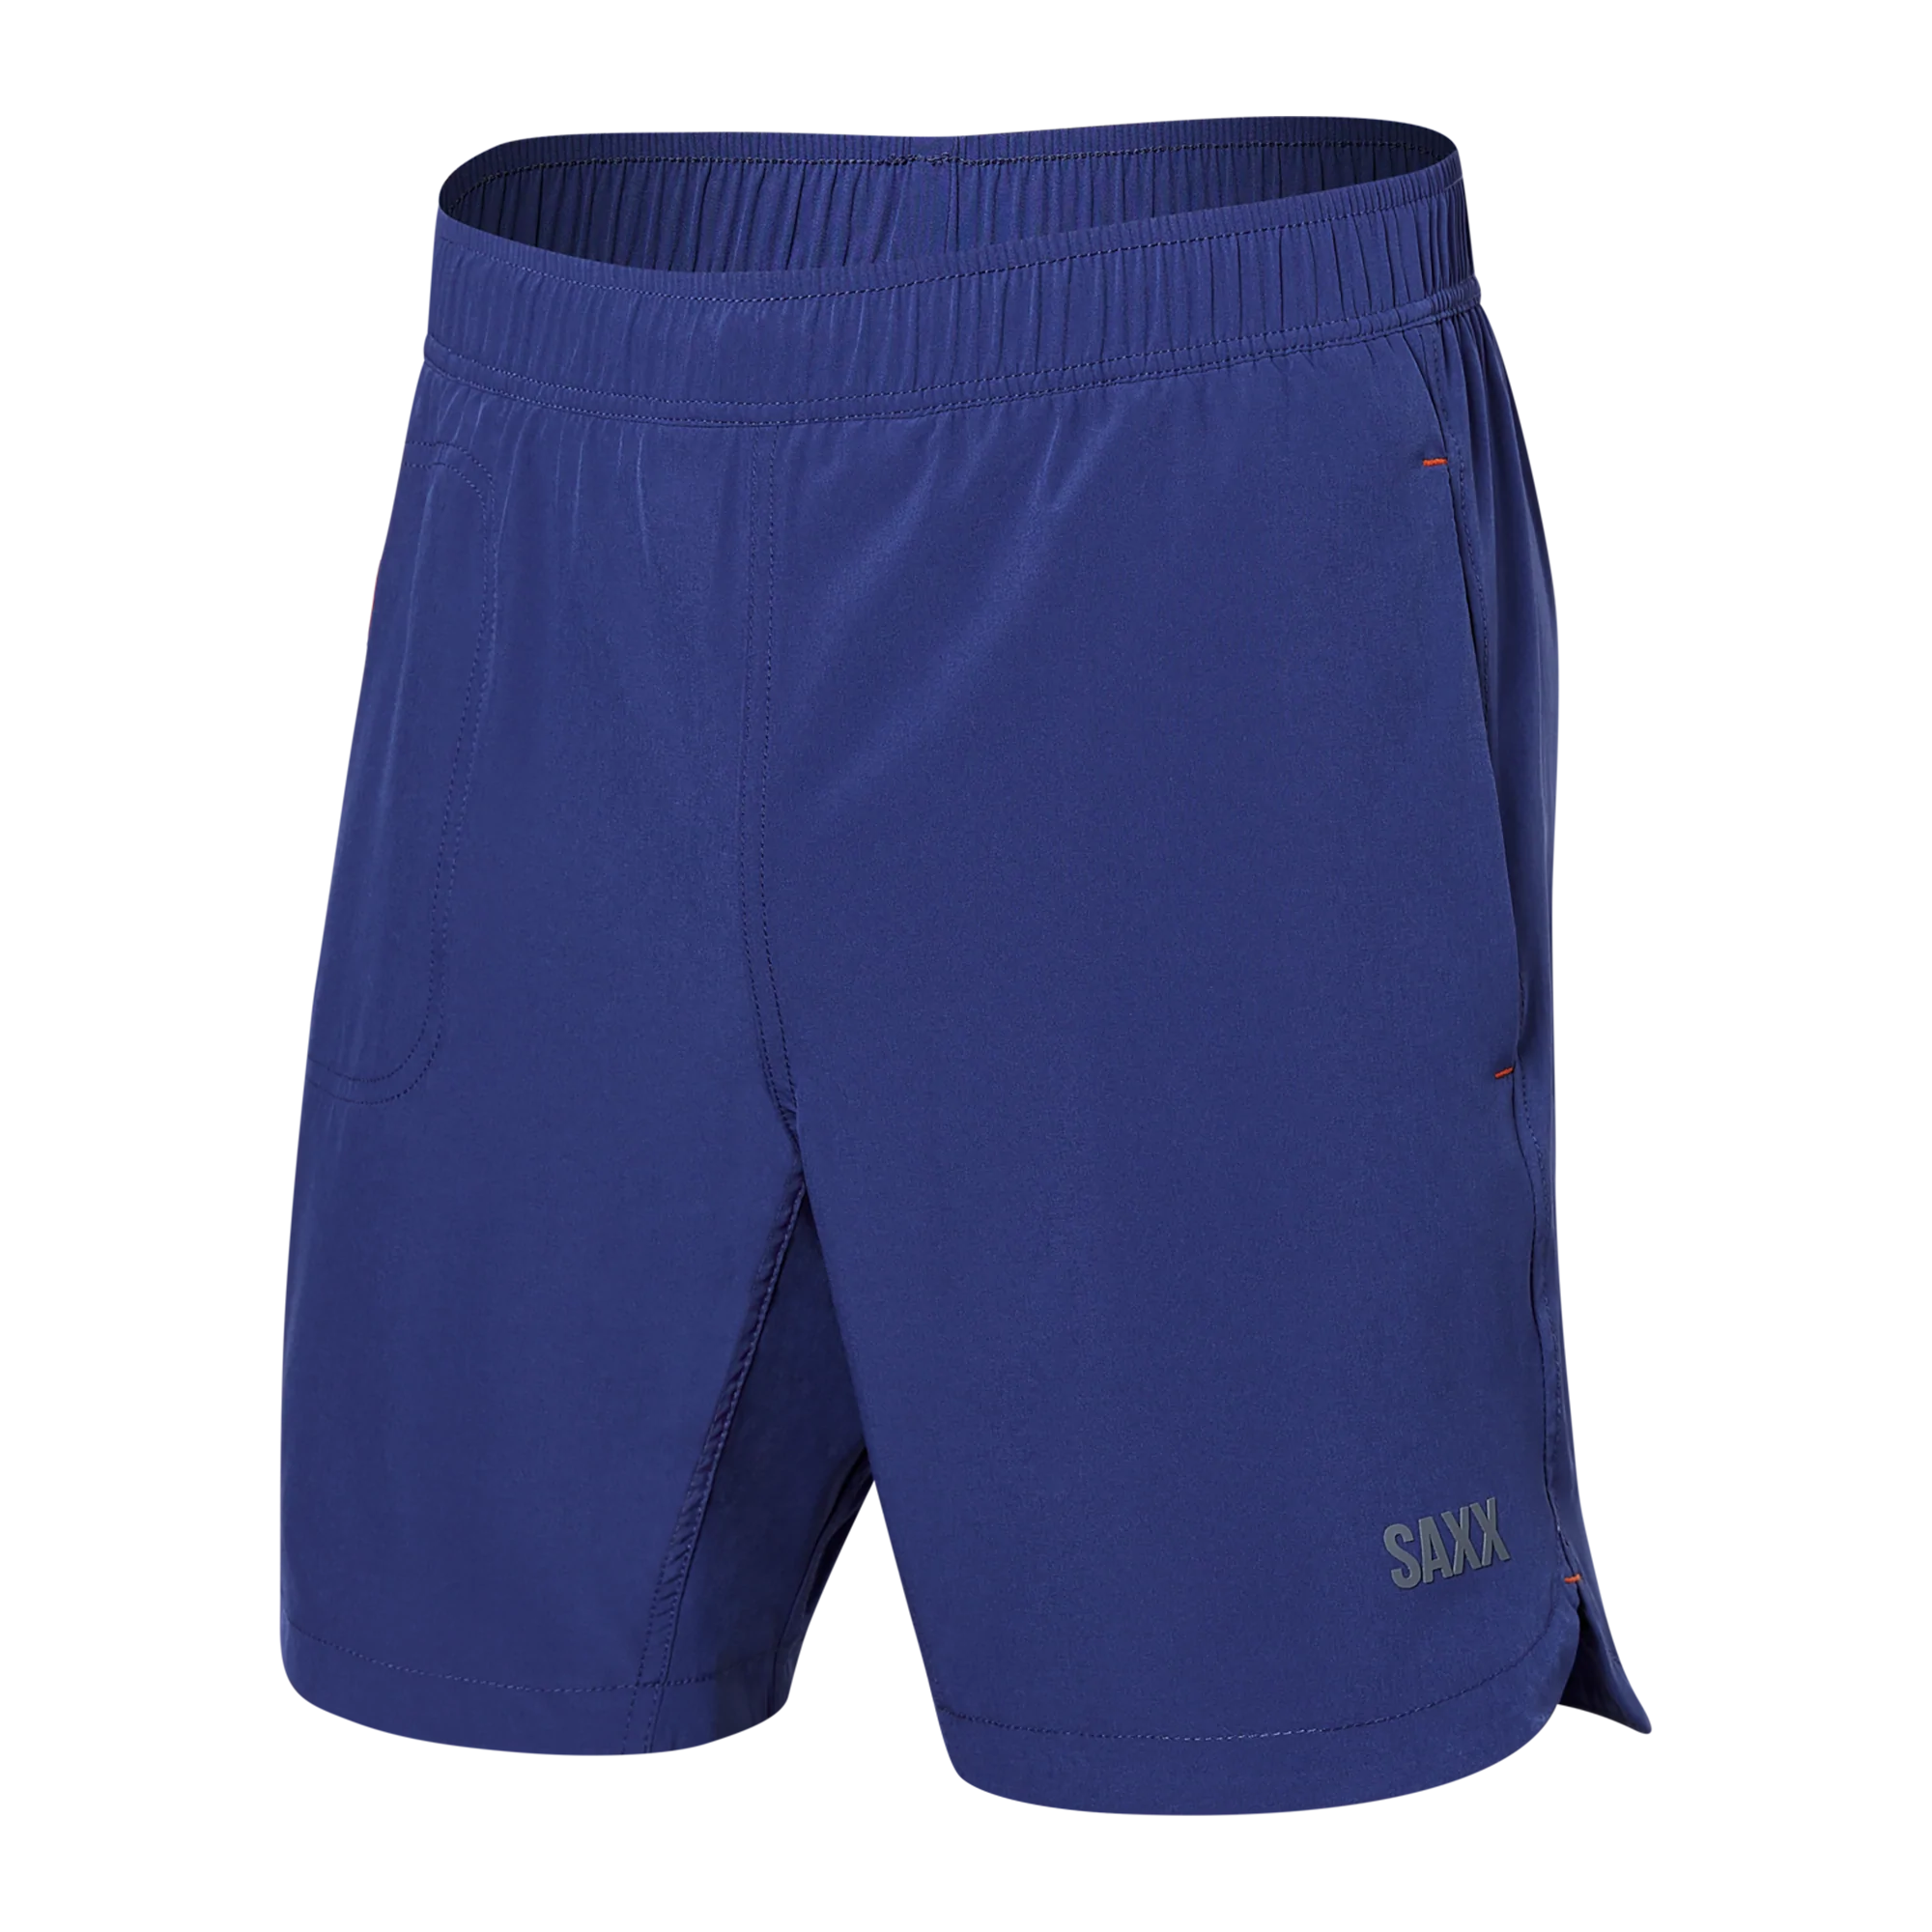 Kyodan X-Large Activewear Shorts Flat Front Pockets Moisture Wicking Blue  New Size XL - $30 New With Tags - From Lori